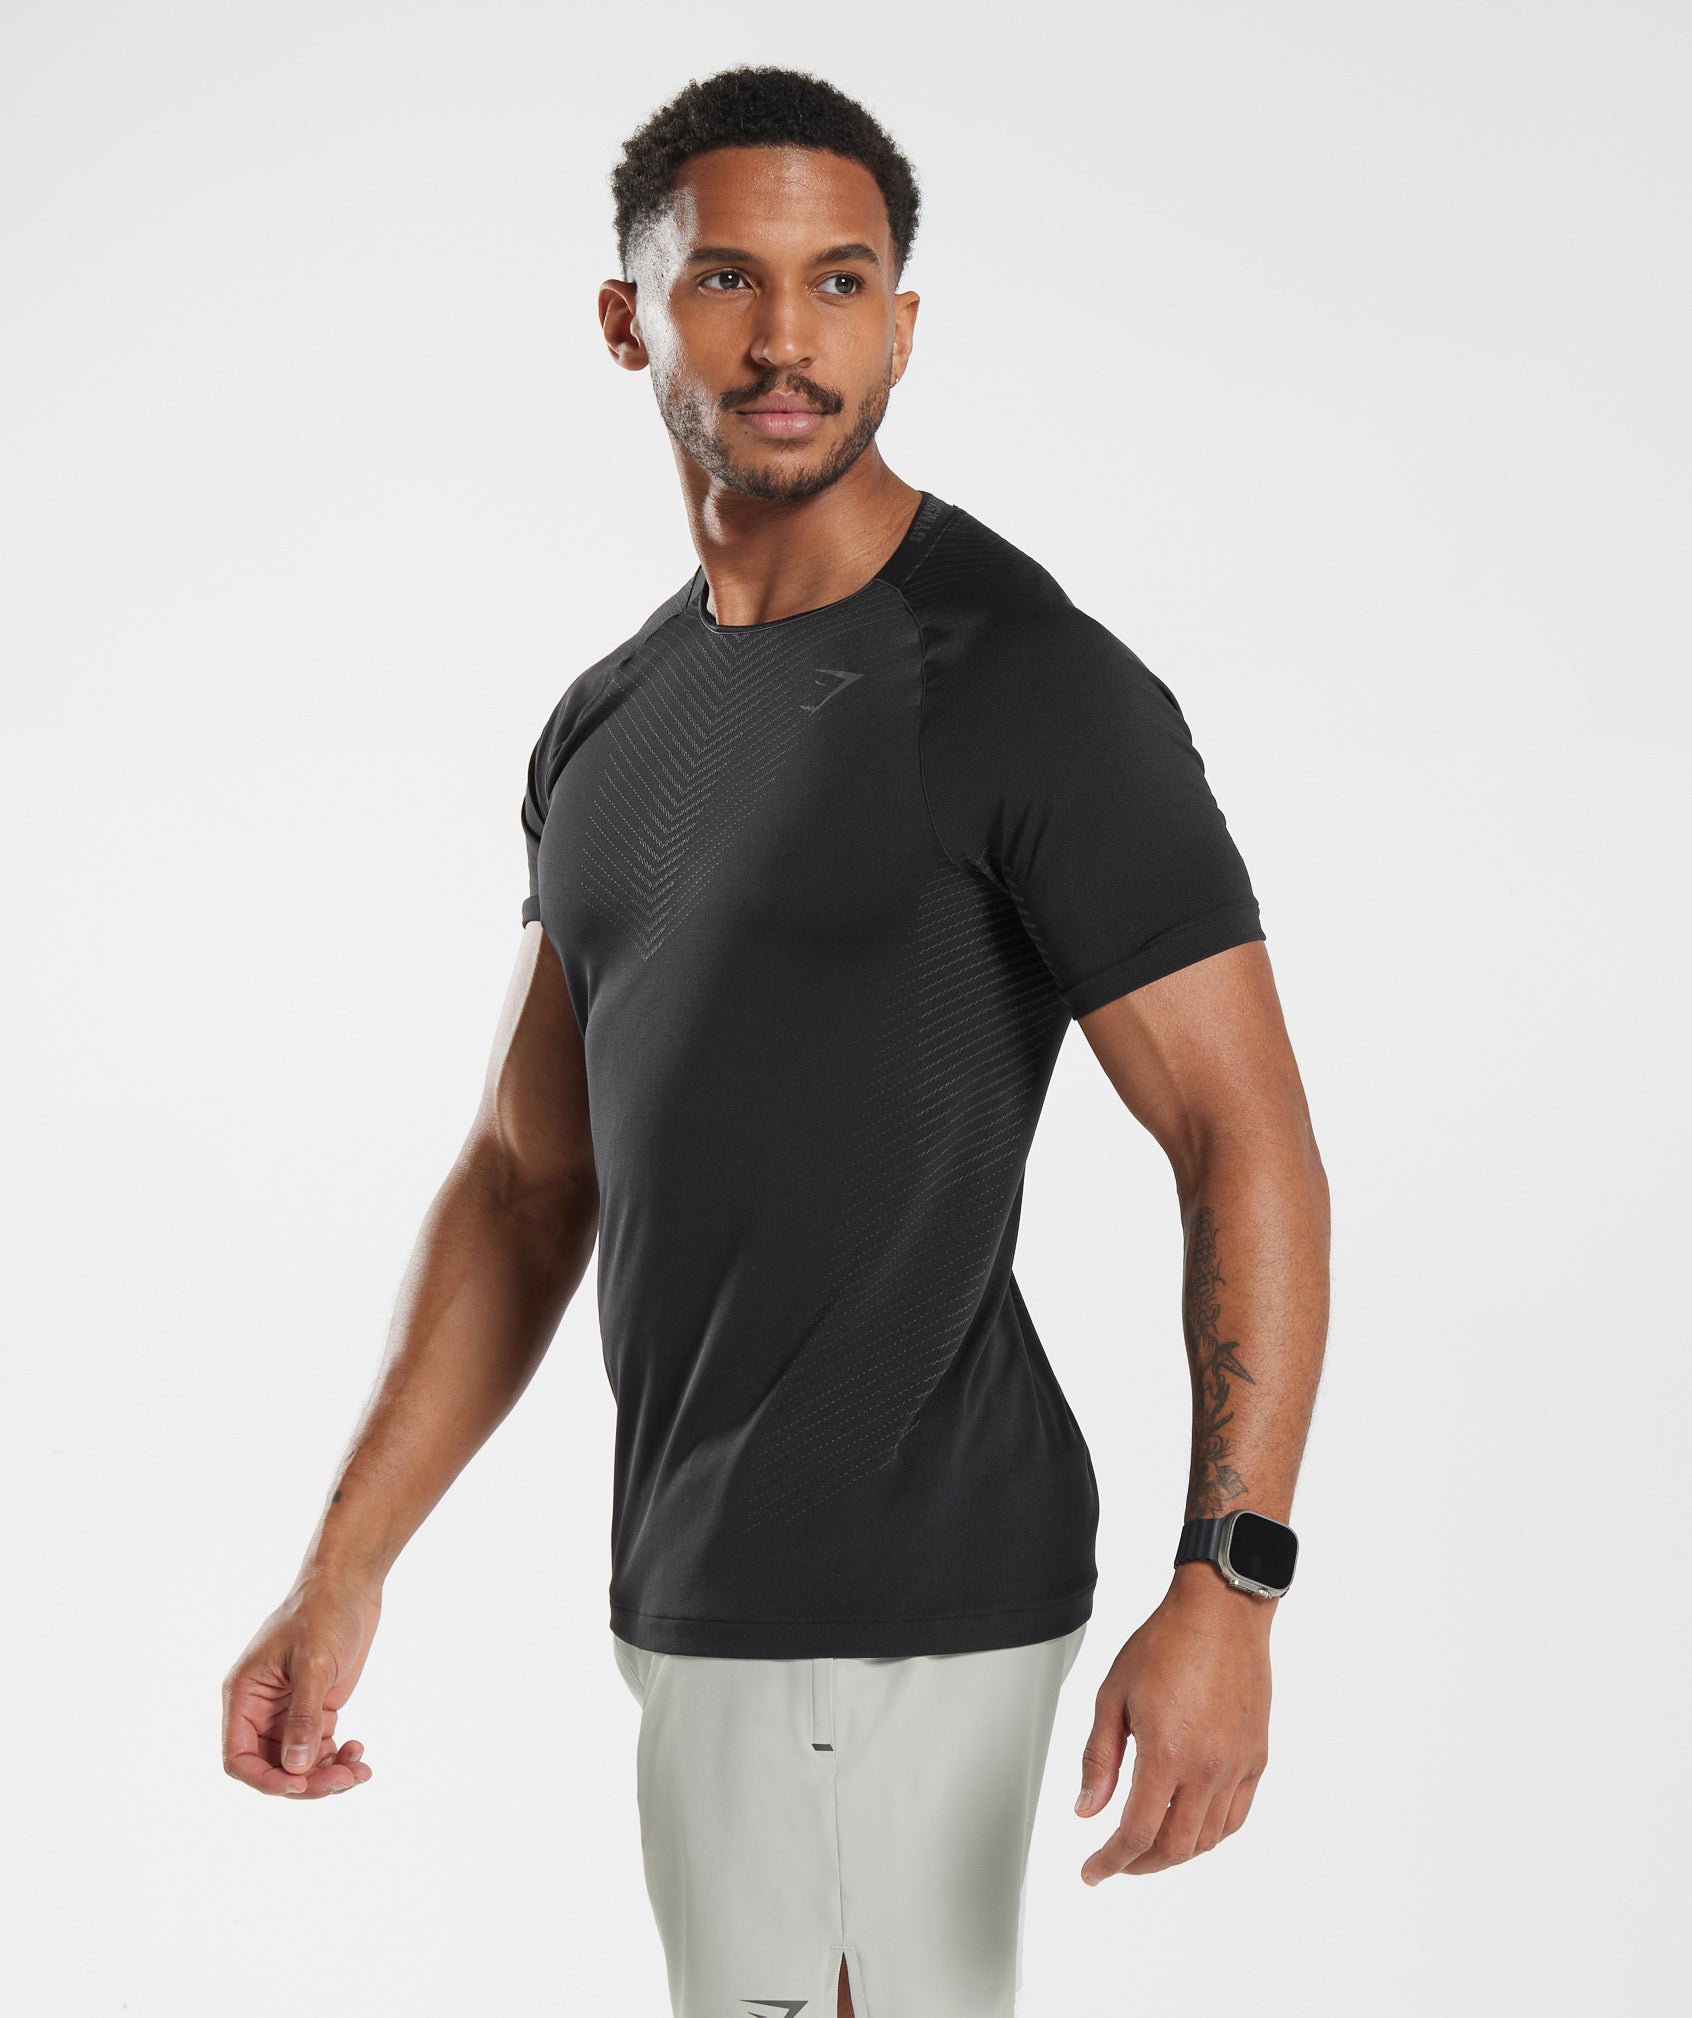 Apex Seamless T-Shirt in Black/Silhouette Grey - view 3